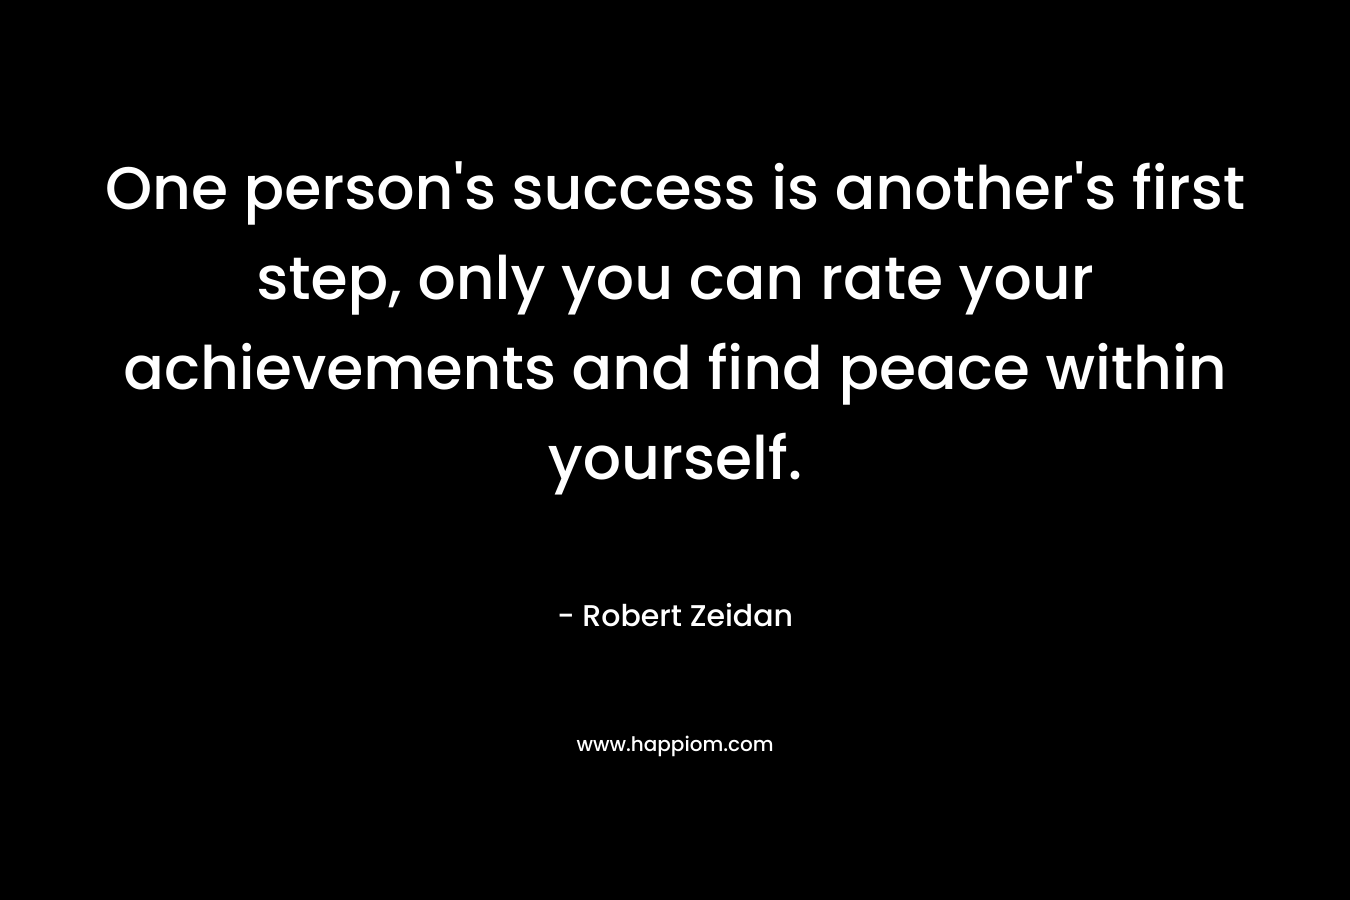 One person’s success is another’s first step, only you can rate your achievements and find peace within yourself. – Robert Zeidan